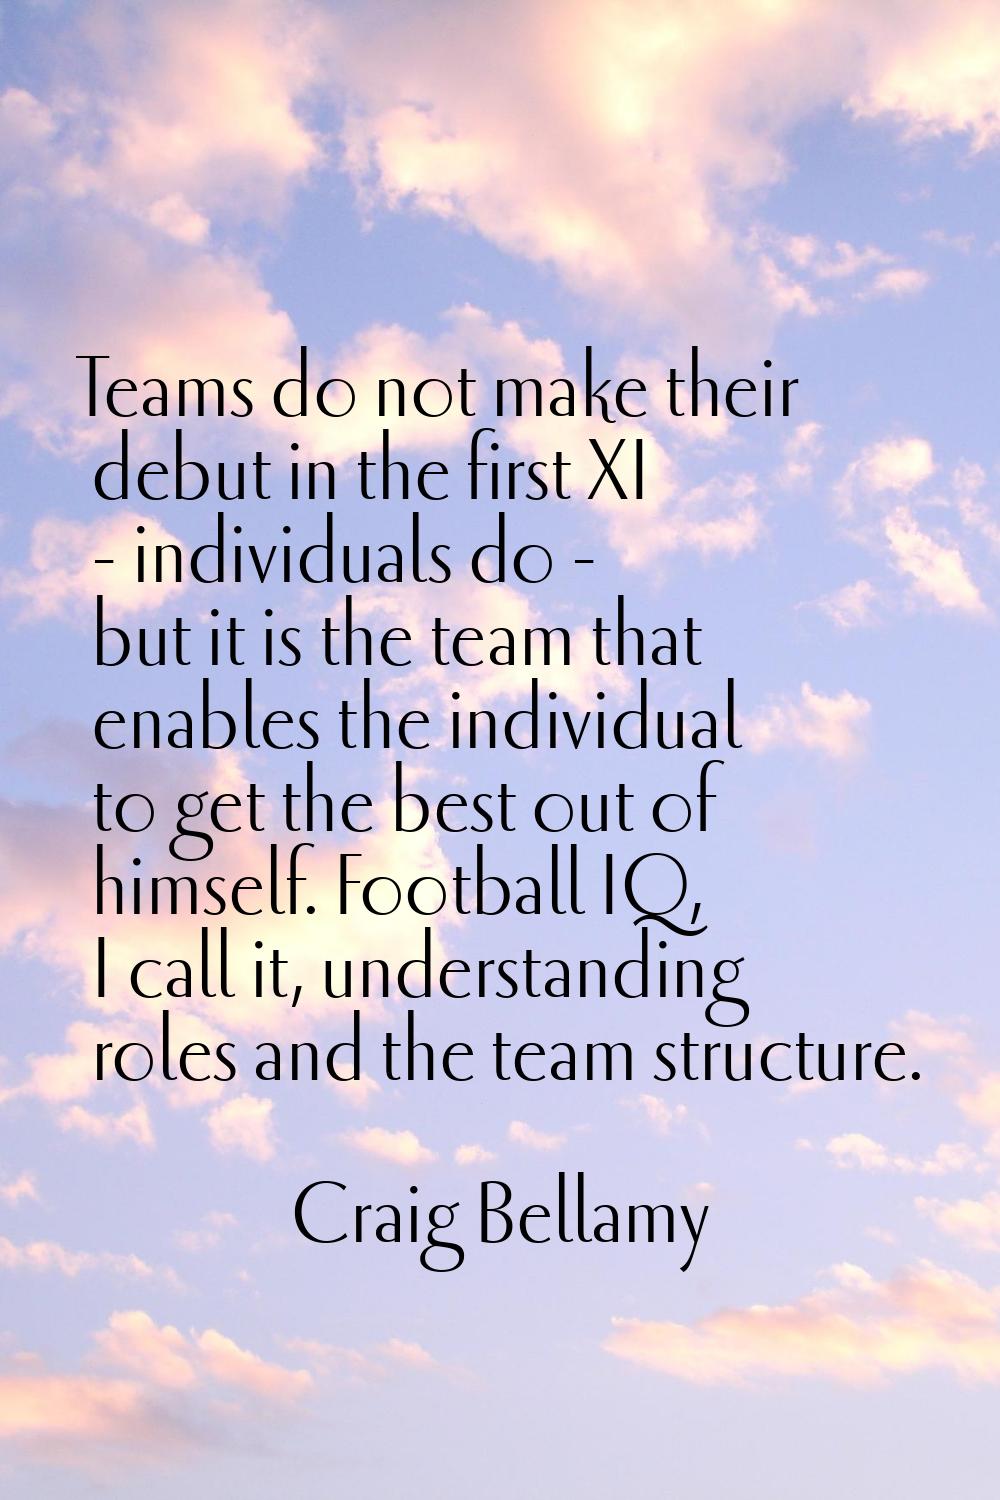 Teams do not make their debut in the first XI - individuals do - but it is the team that enables th